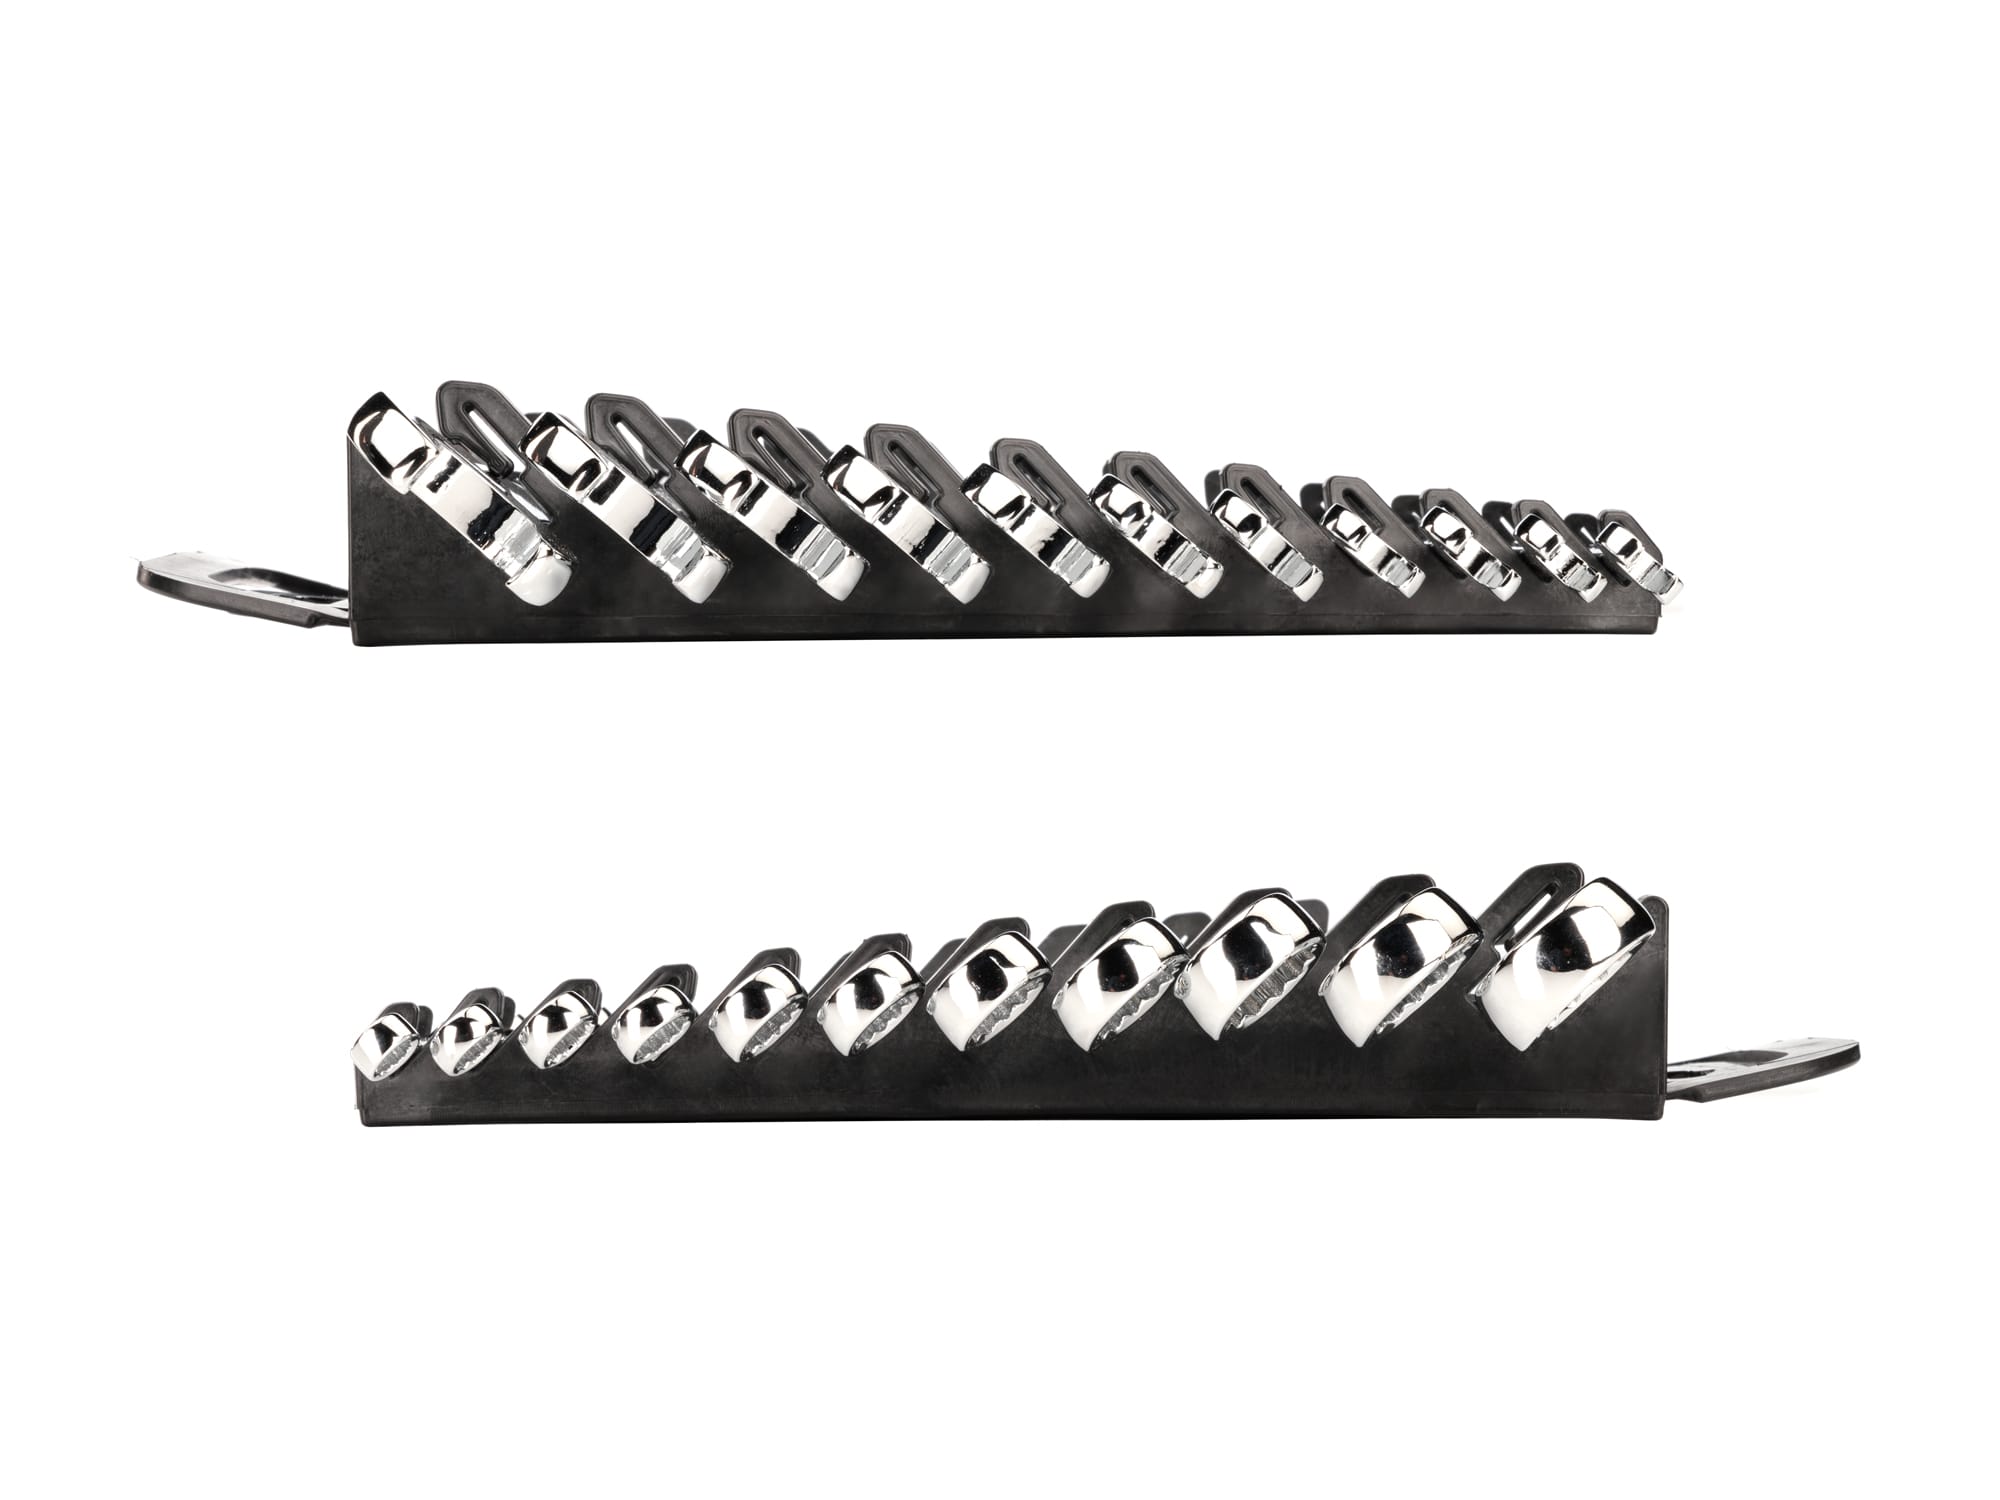 Combination Wrench Set, 11-Piece (1/4-3/4 in.) - Holder